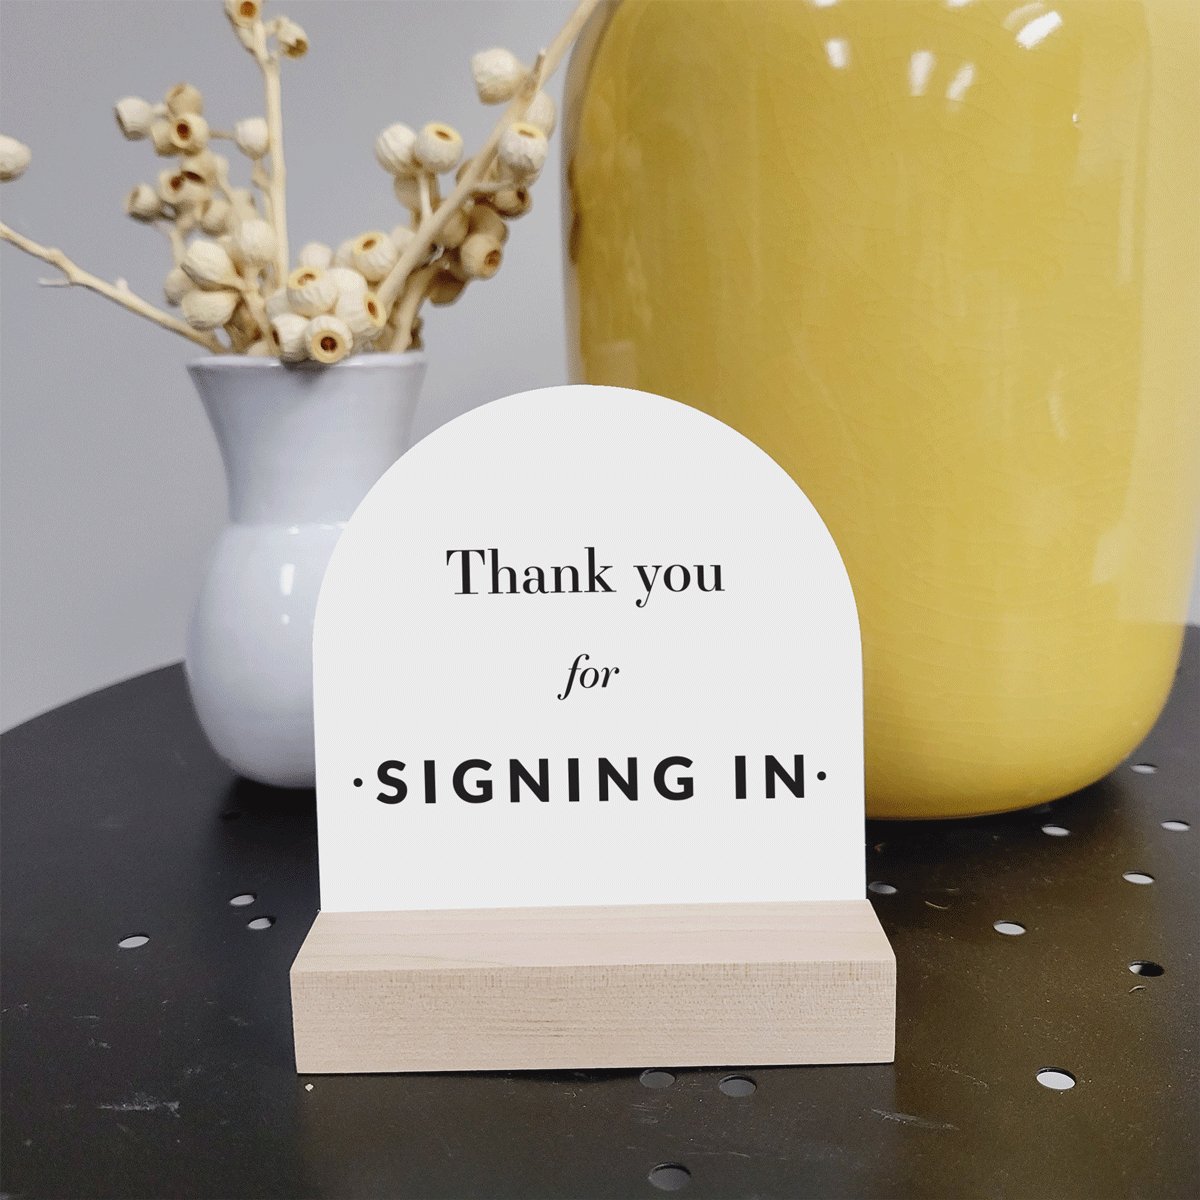 4x4 Arched Sign - Signing In - All Things Real Estate